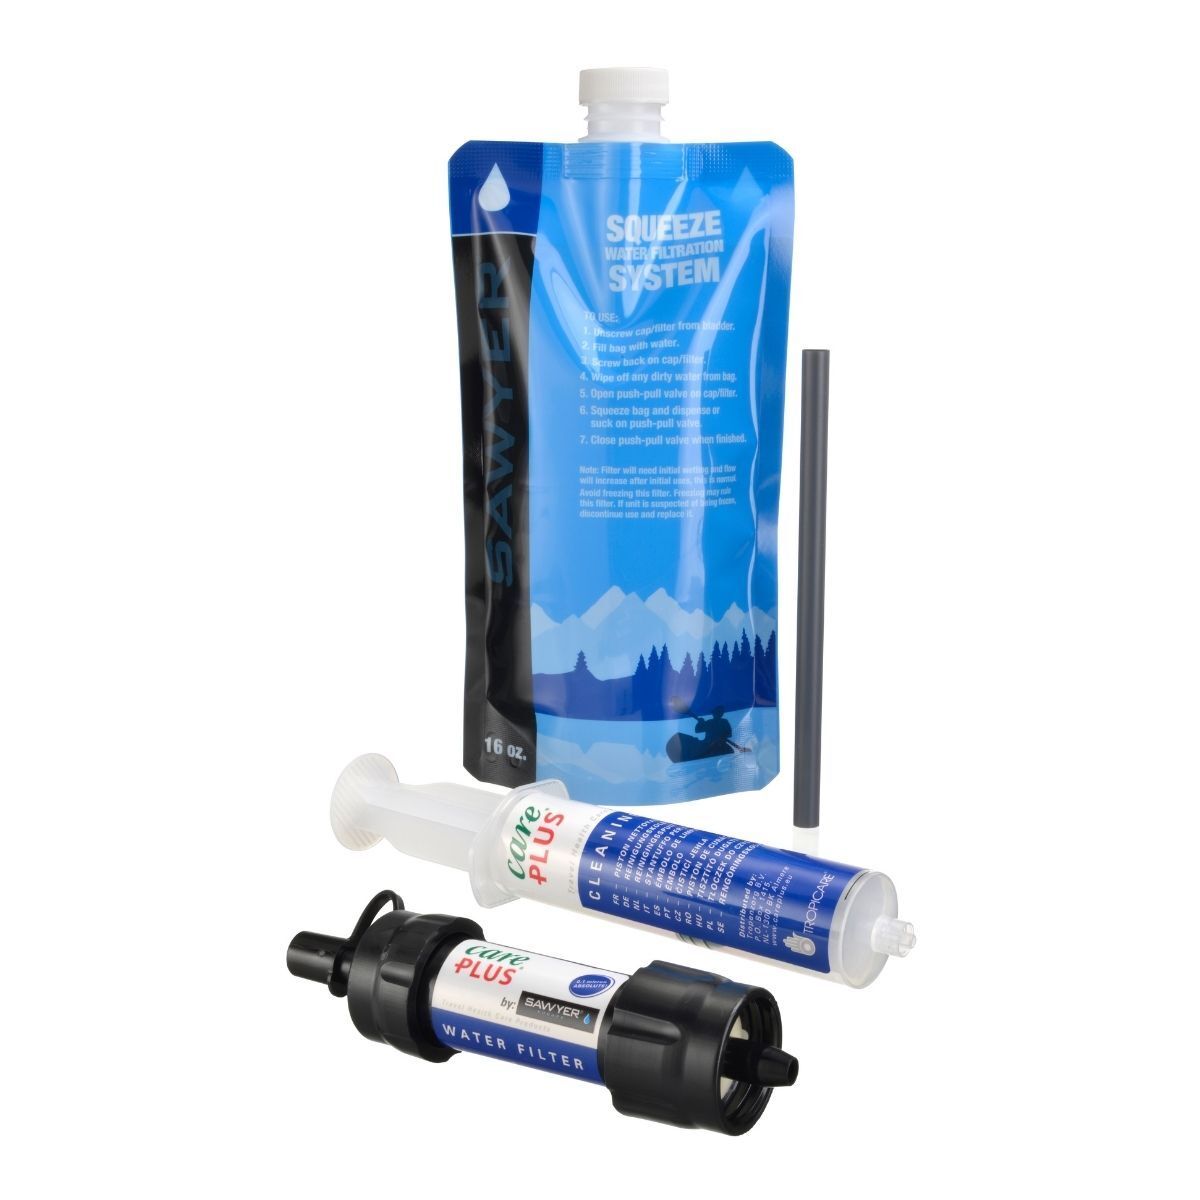 Care Plus Water filter - Waterfilter